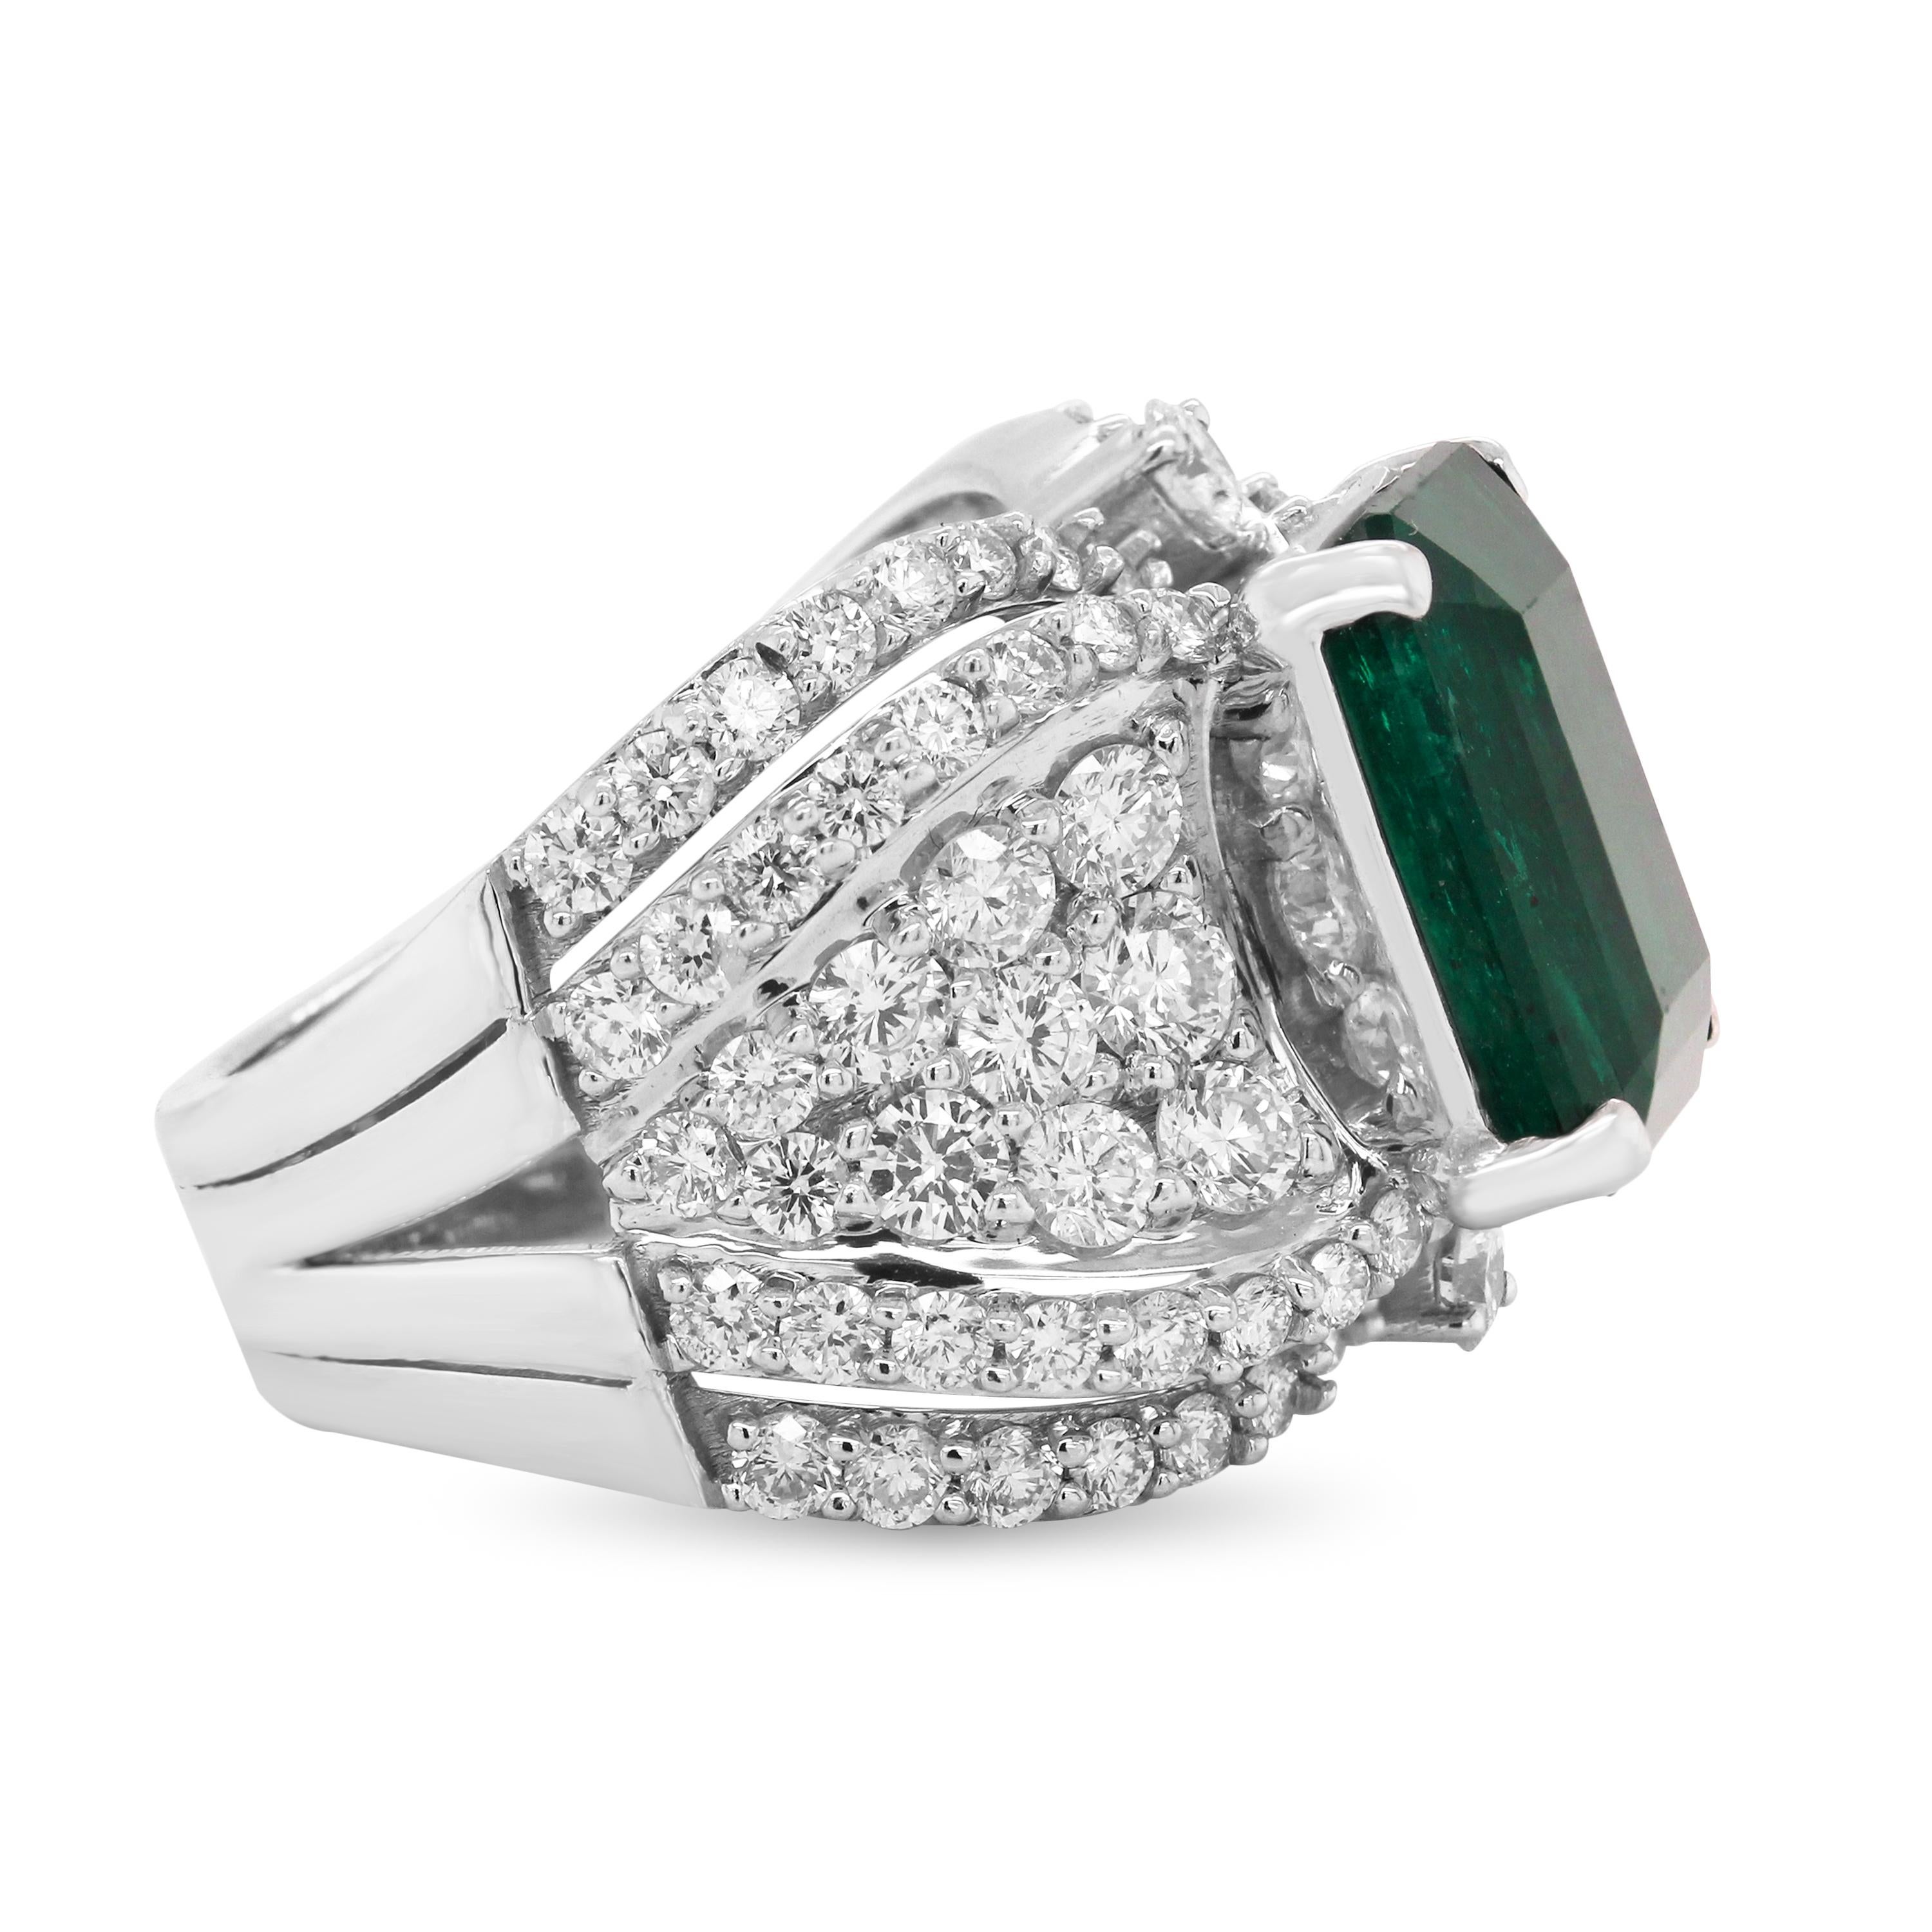 Octagon Cut GIA Certified 7.25 Carat Colombian Emerald 18k White Gold Diamond Cocktail Ring For Sale